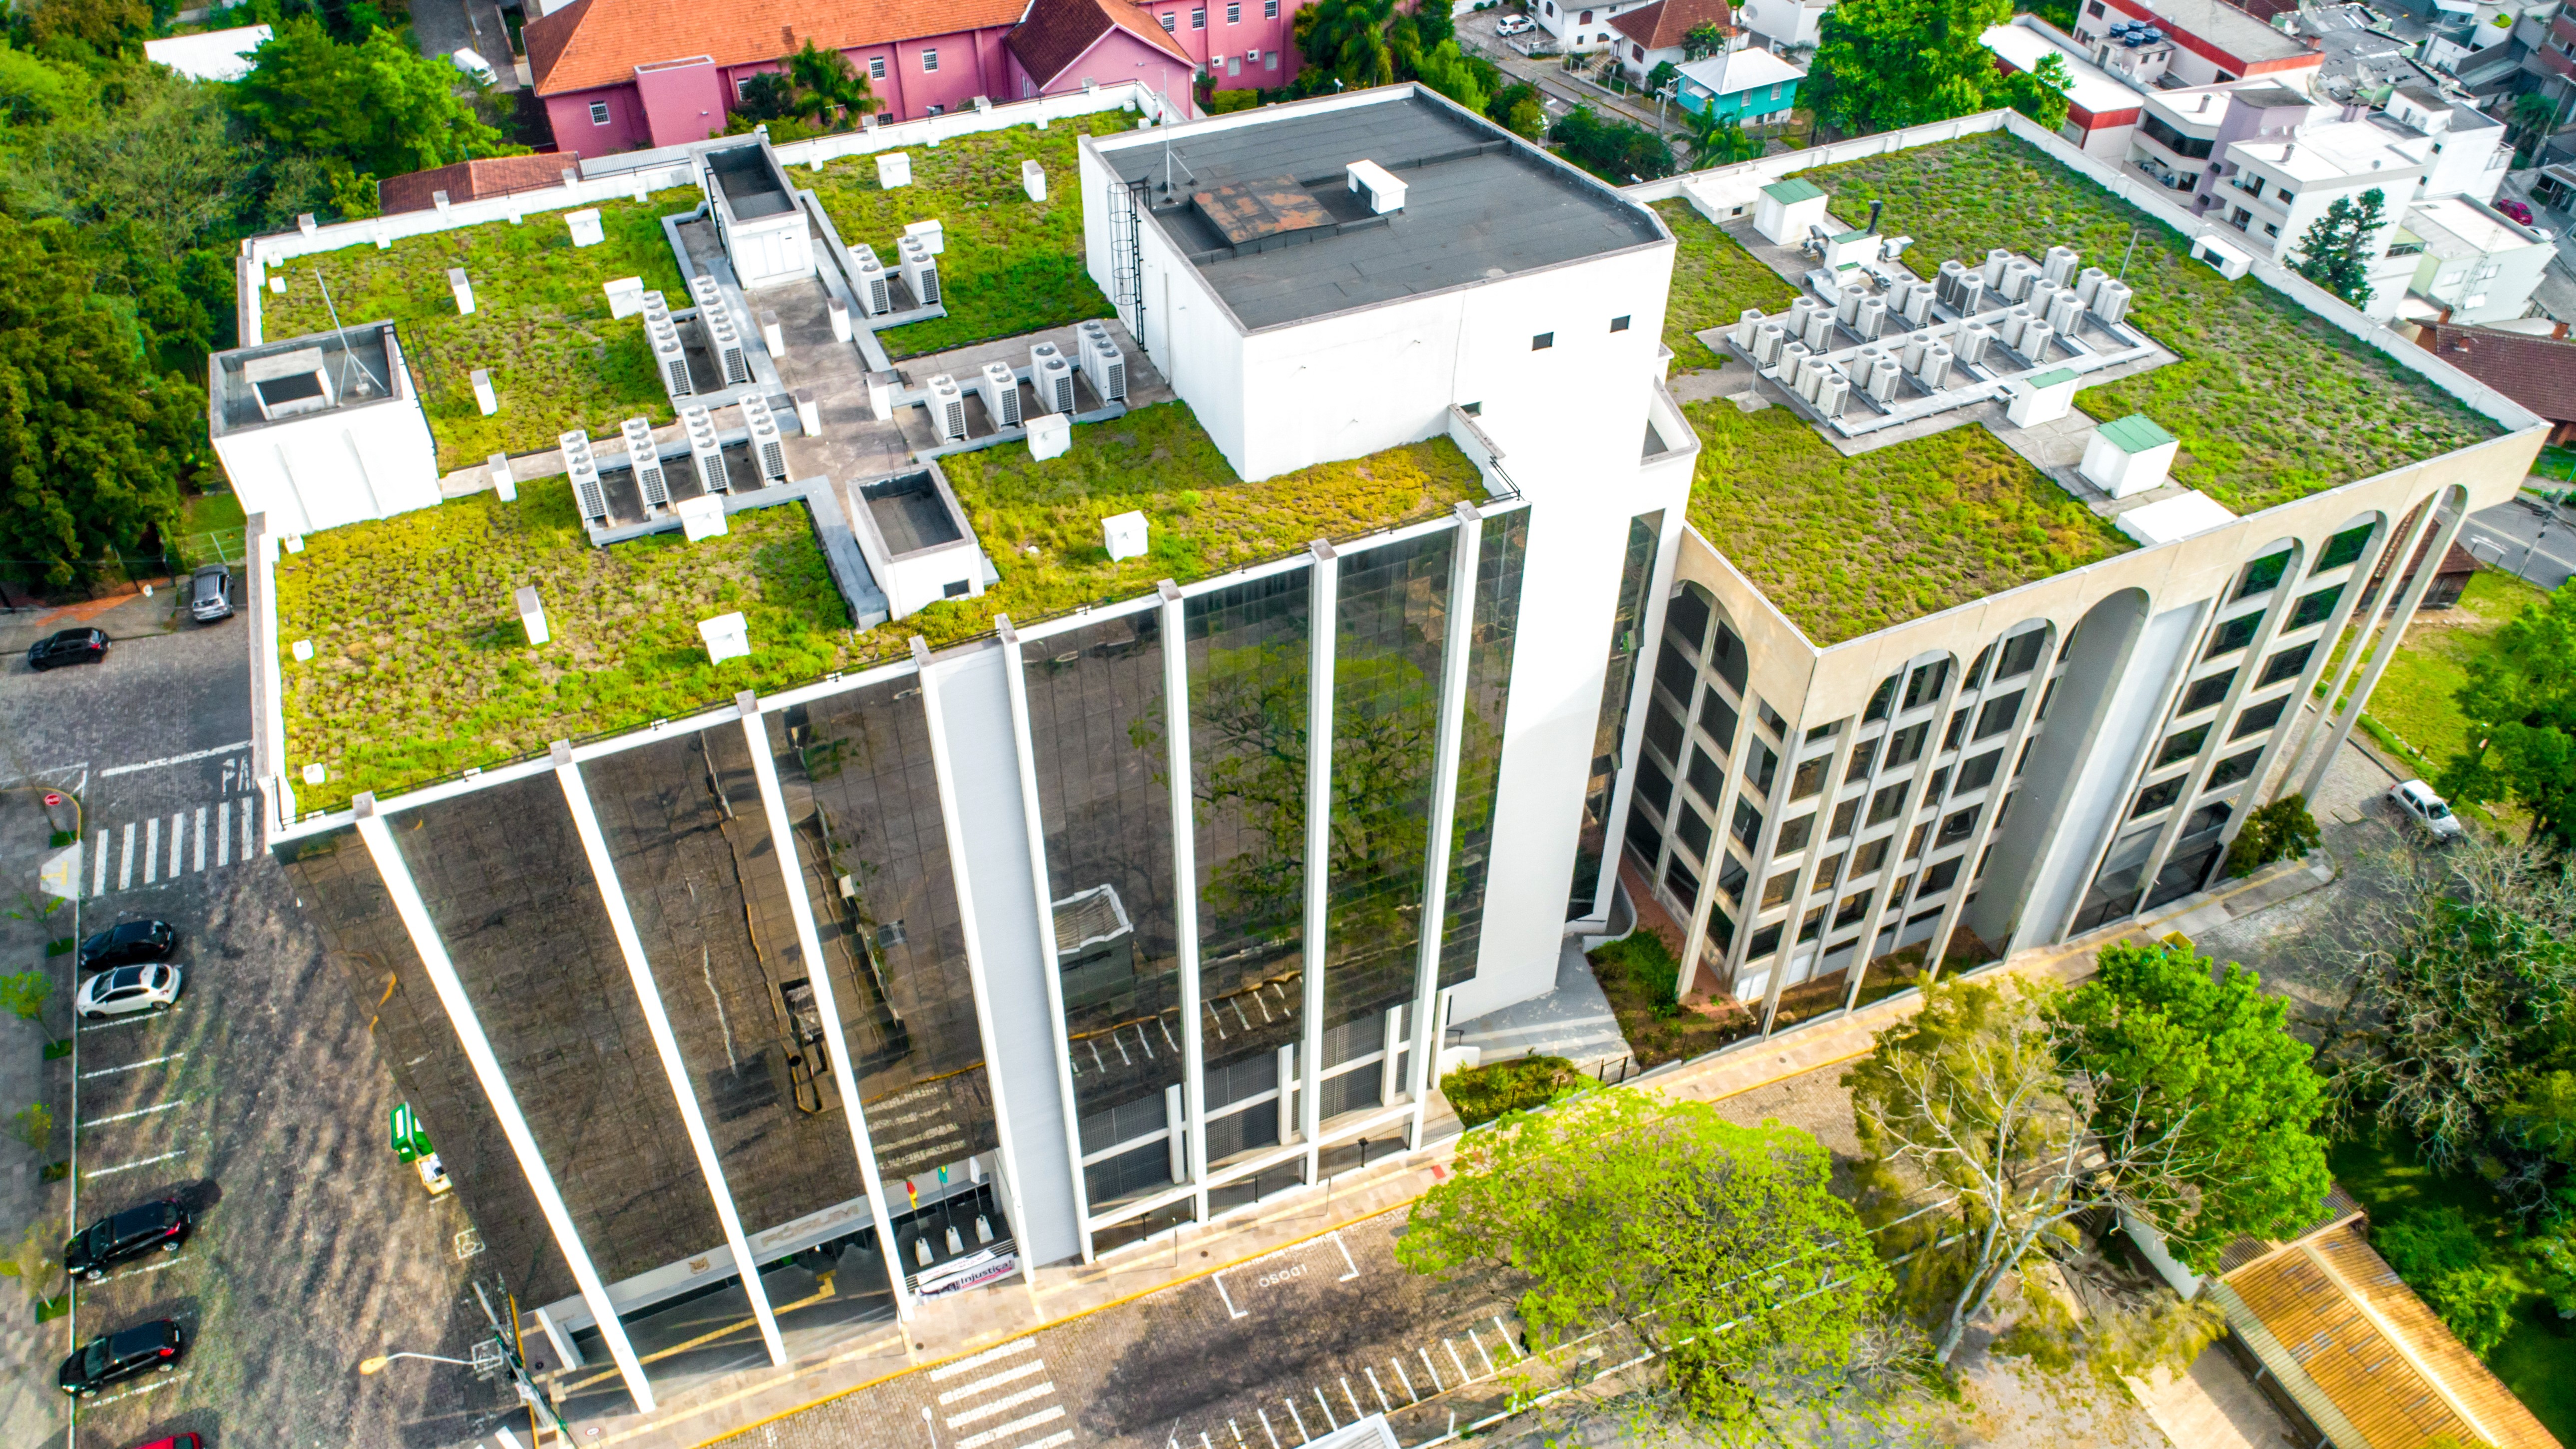 Aerial view of high rise buildings with green roofs